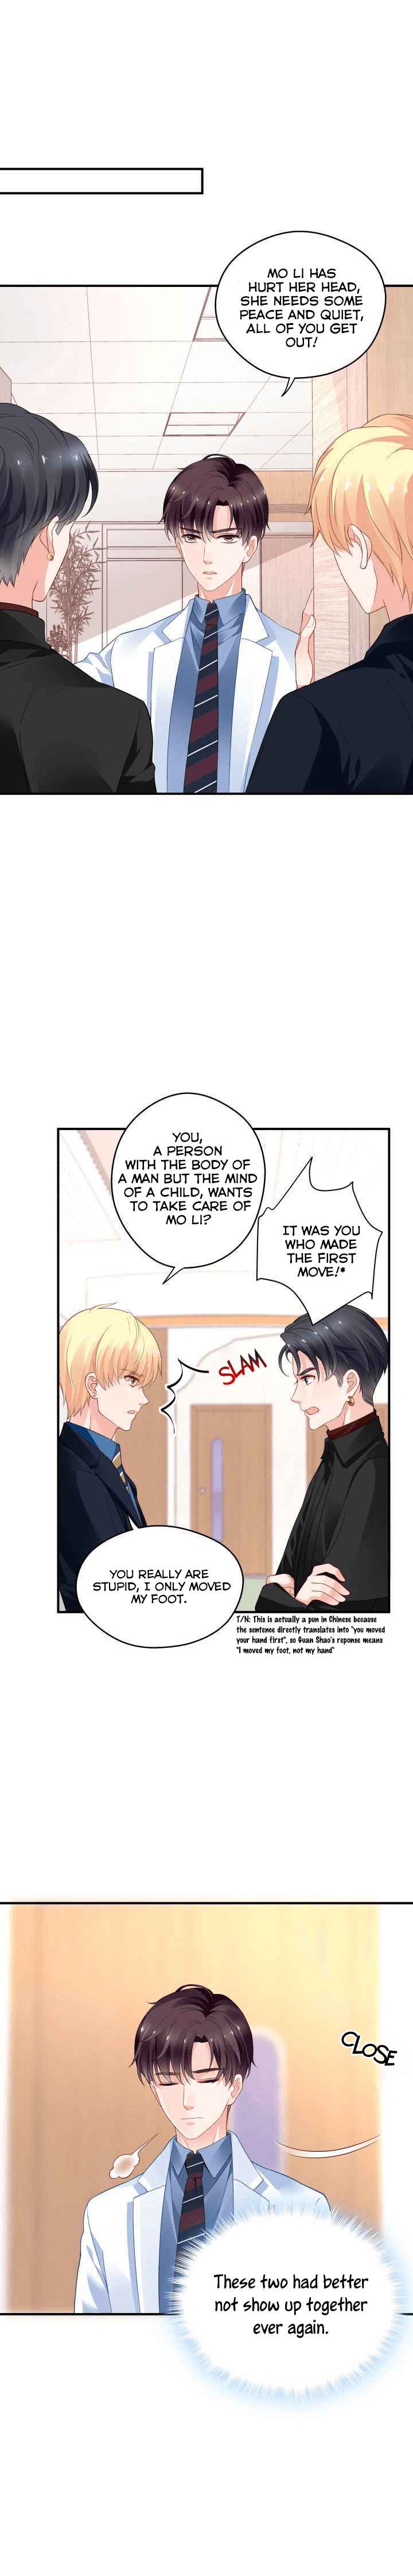 My ¼ Boyfriends Ch. 24 The Four Meeting For the First Time